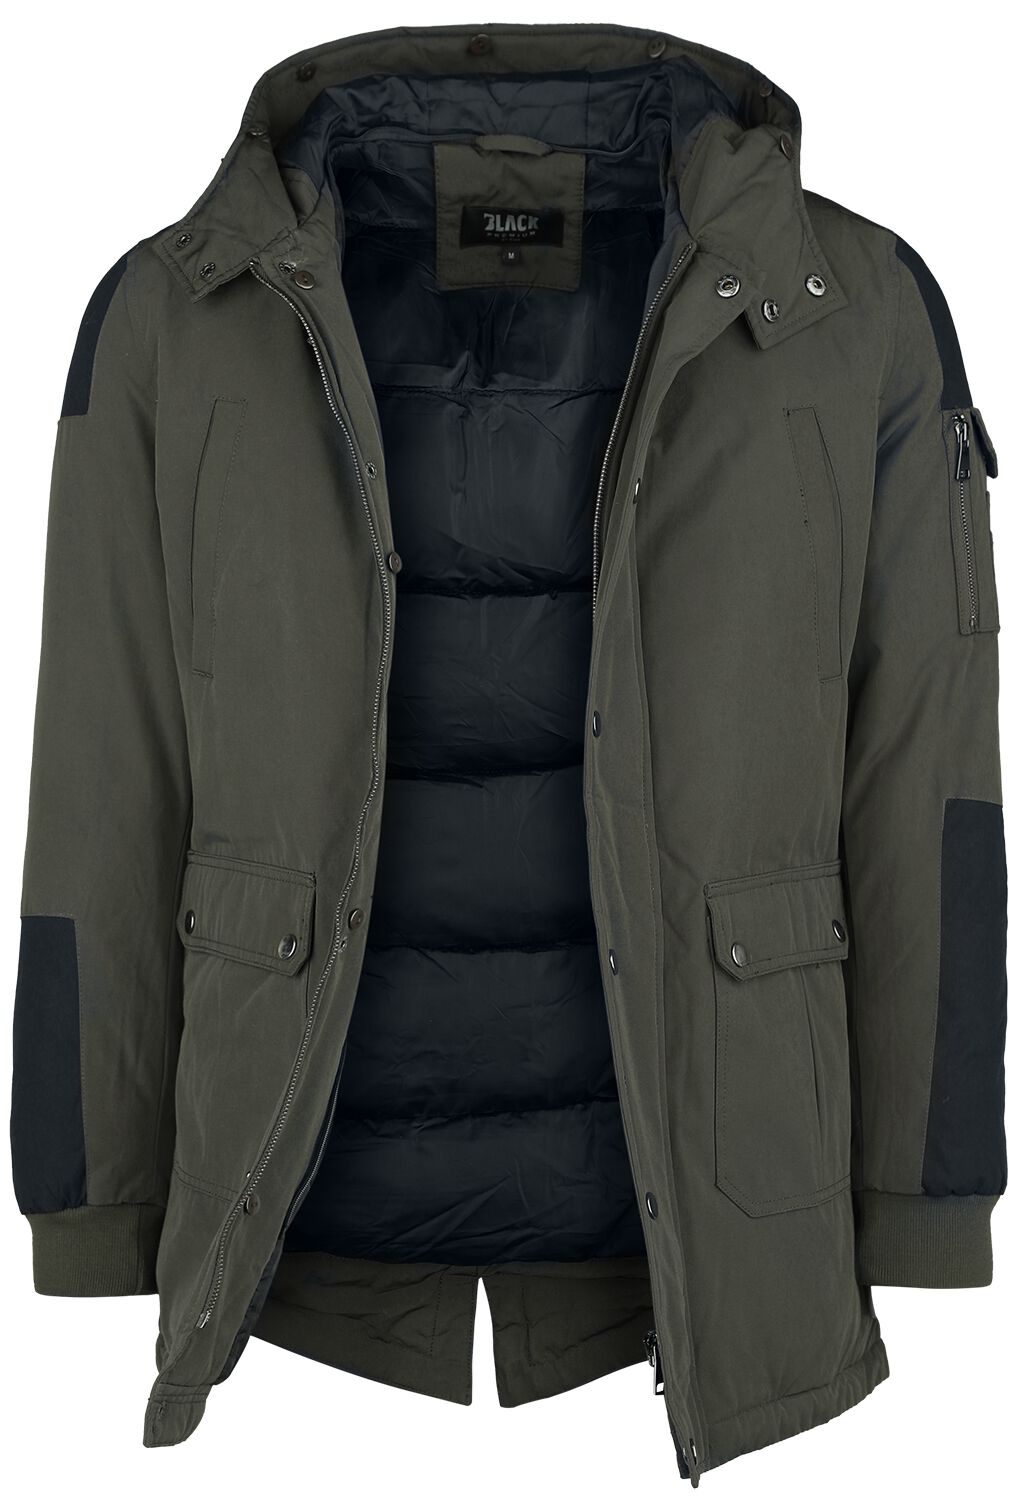 Image of Giacca invernale di Black Premium by EMP - Casual winter jacket with faux-fur collar - S a XL - Uomo - verde oliva